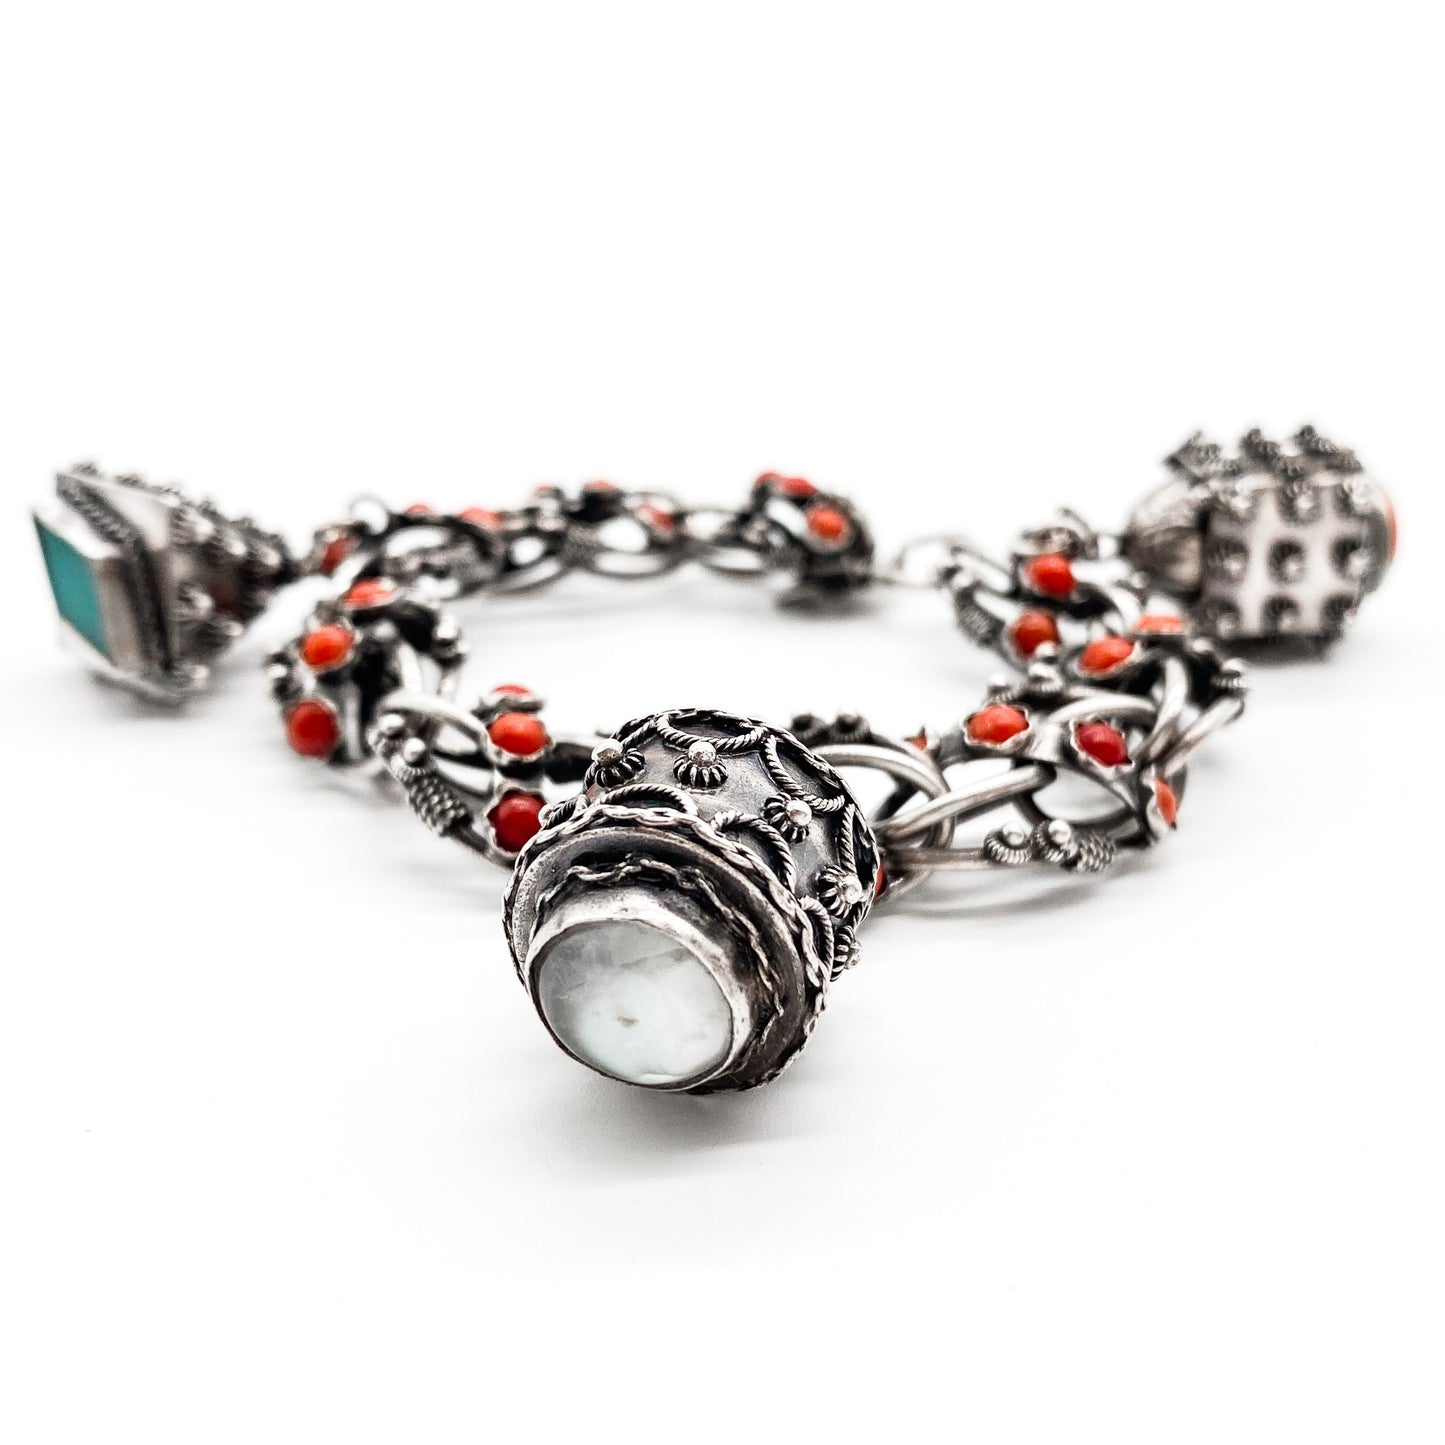 Stunning silver filigree bracelet set with thirty-six natural coral cabochons and three large charms set with coral, moonstone and chrysoprase. Italy